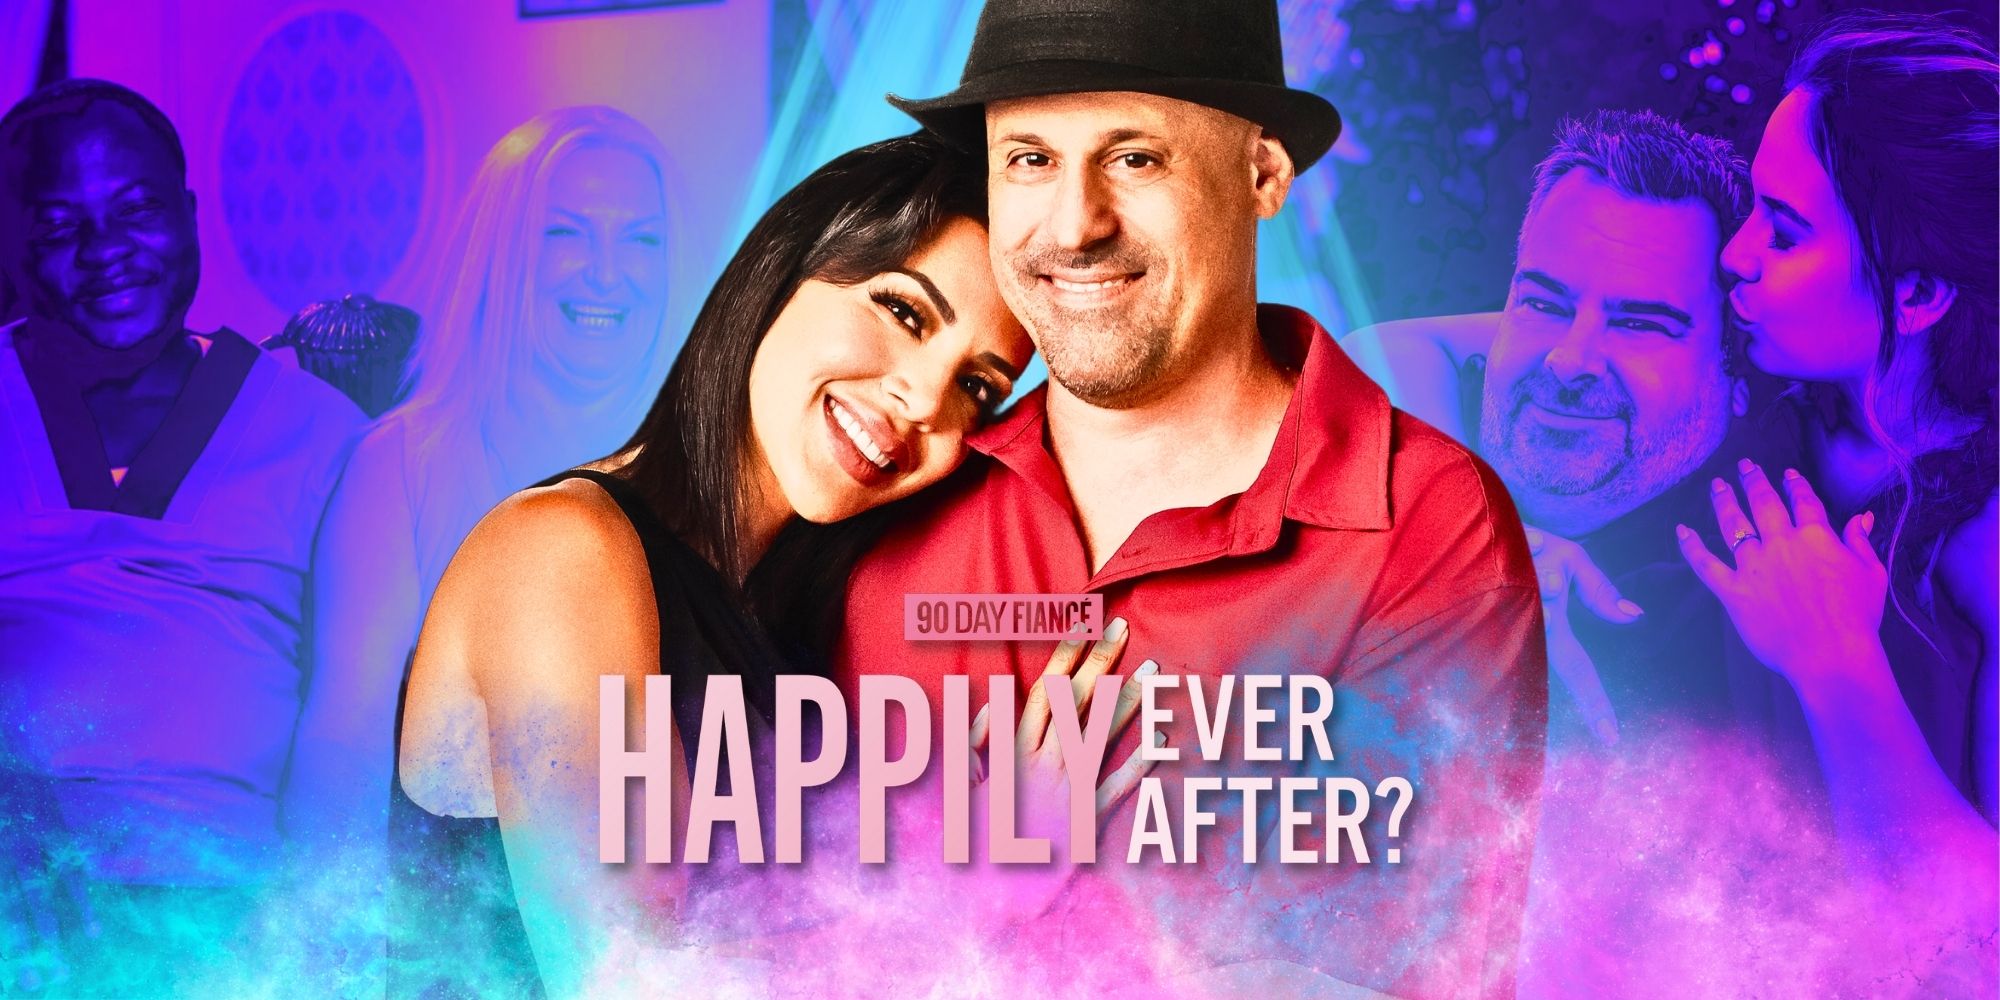 90 Day Fiancé Happily Ever After Season 8 Cast Revealed As 3 Controversial Couples Return 